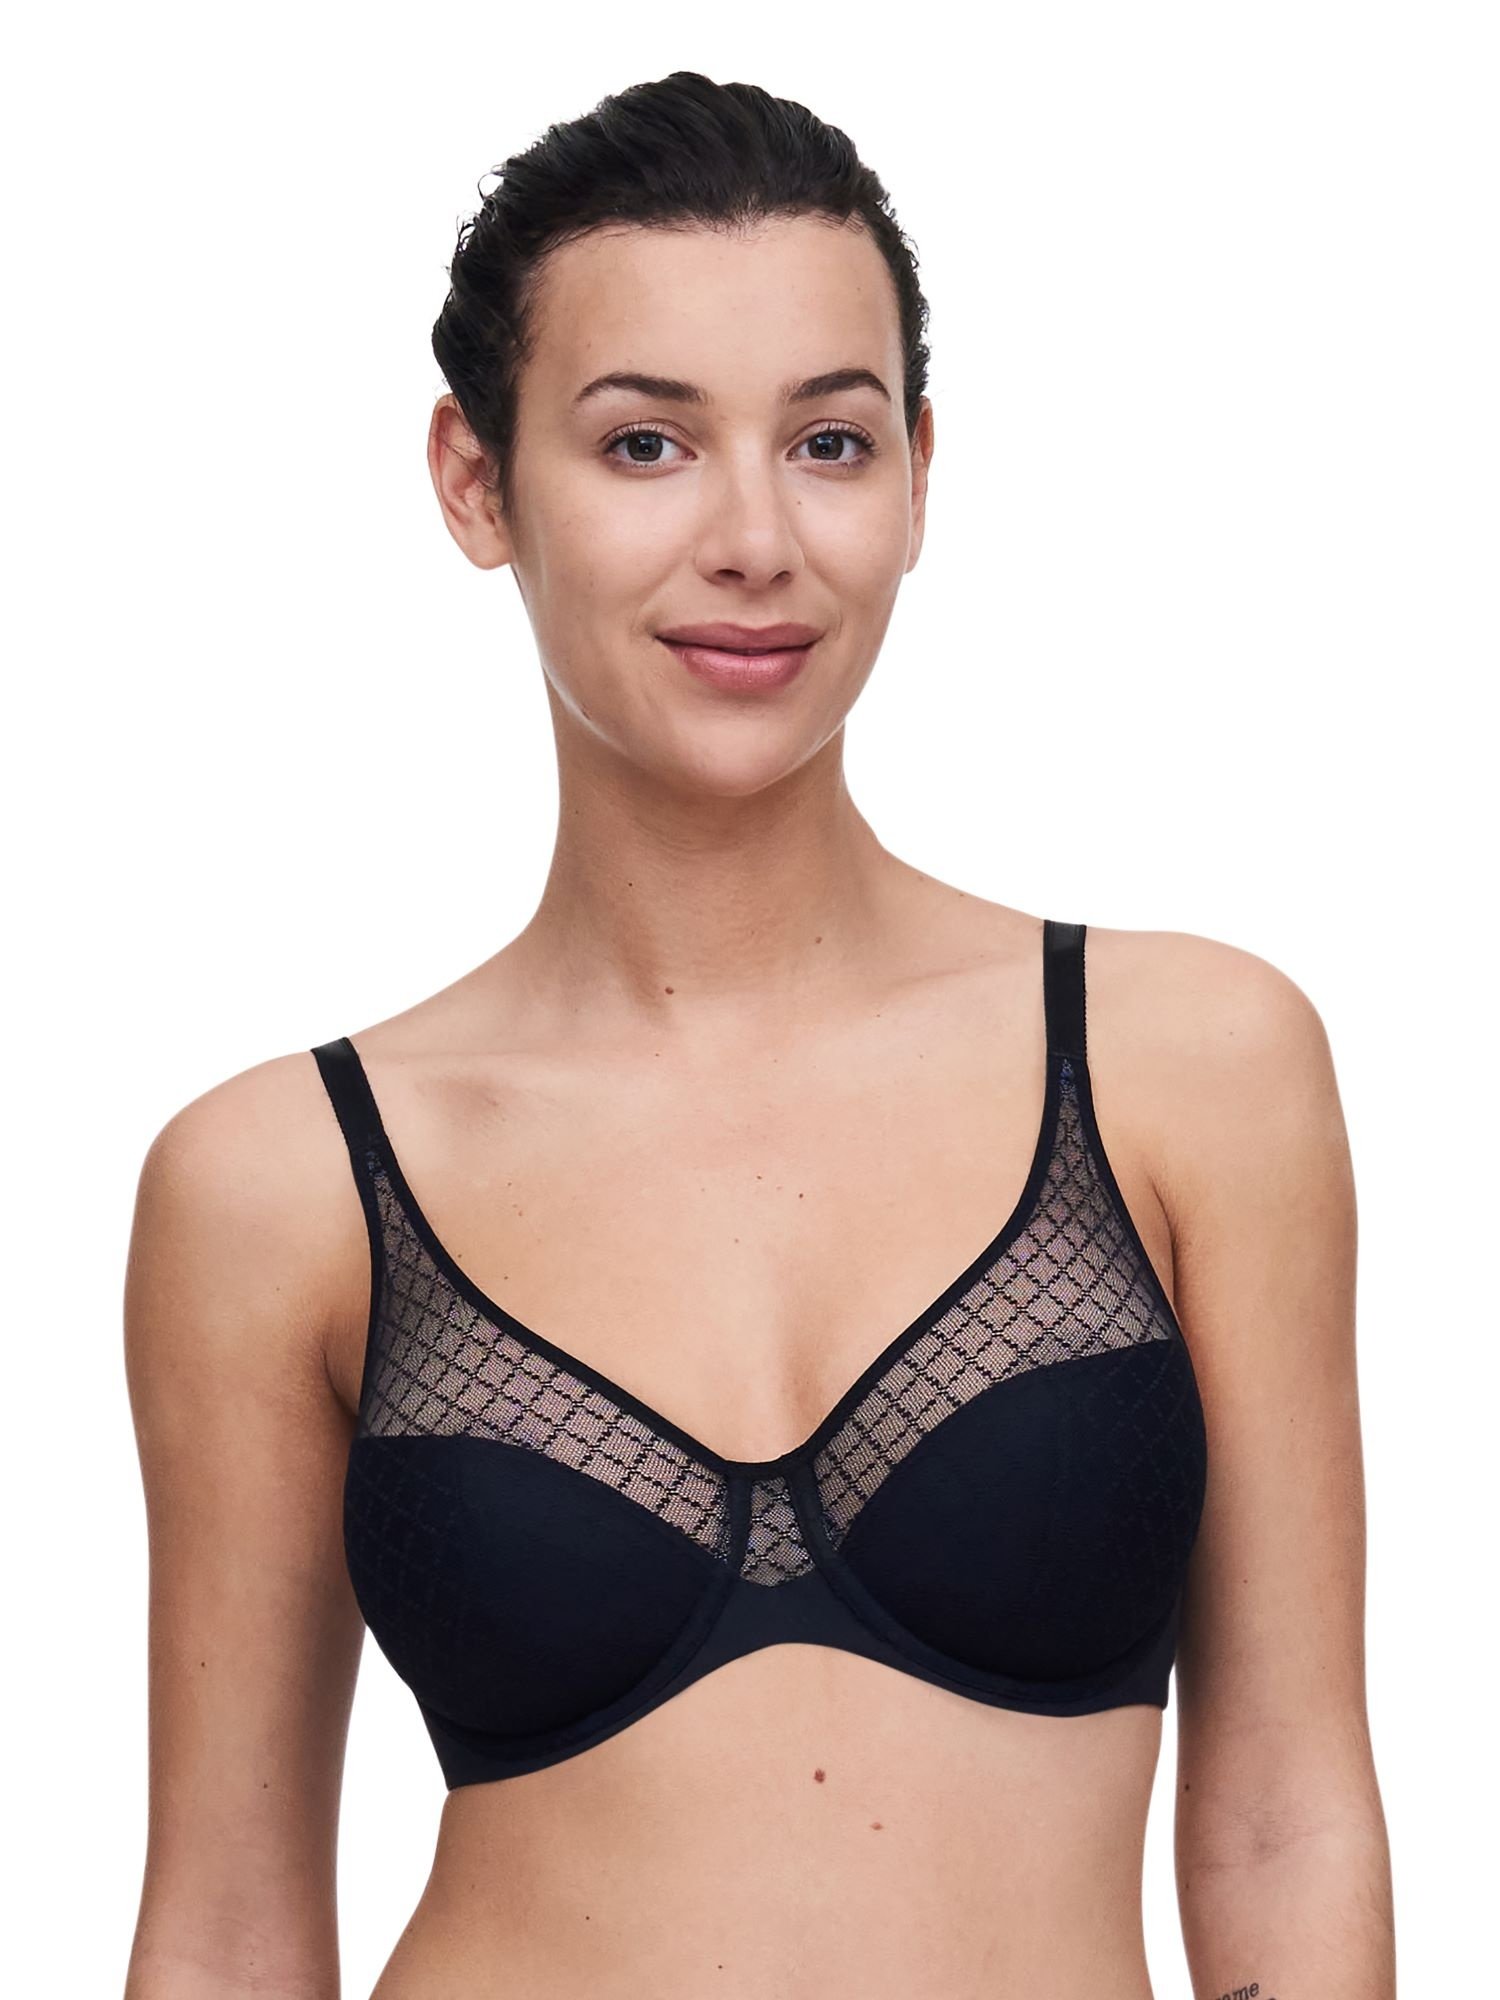 Chantelle Norah Full Coverage Unlined Molded Bra - An Intimate Affaire